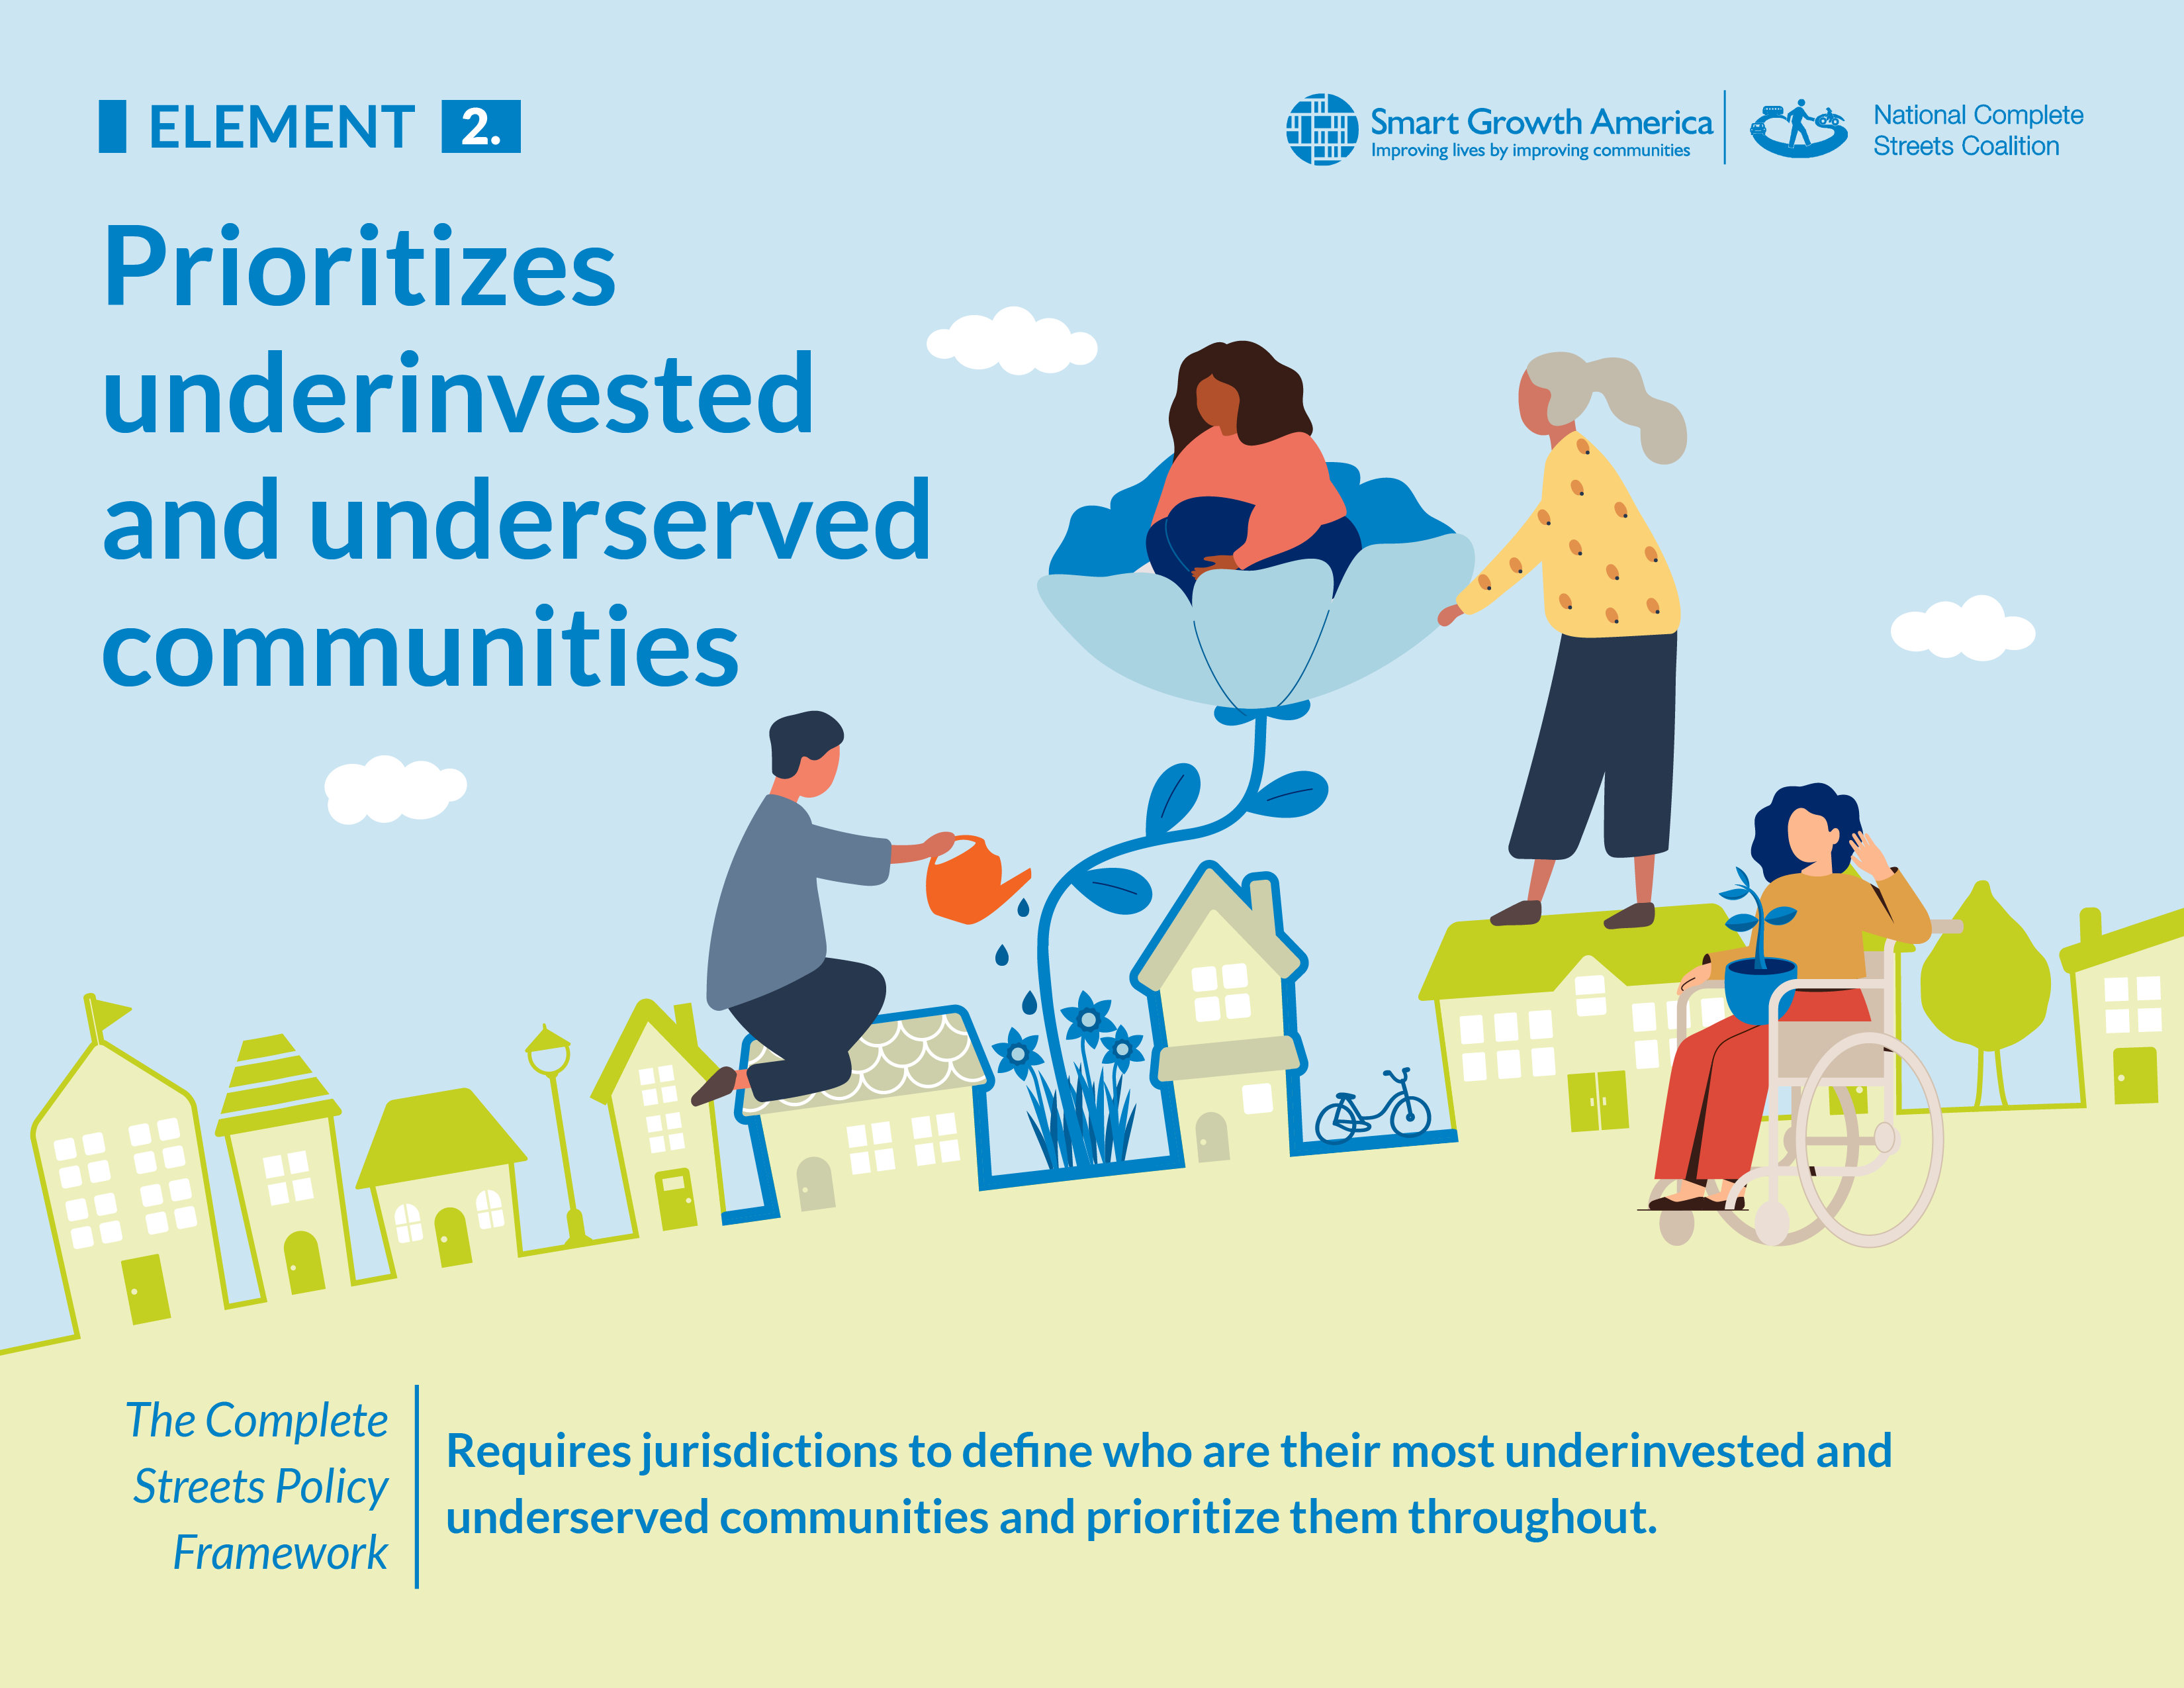 A strong Complete Streets policy prioritizes underinvested and underserved communities (element #2)